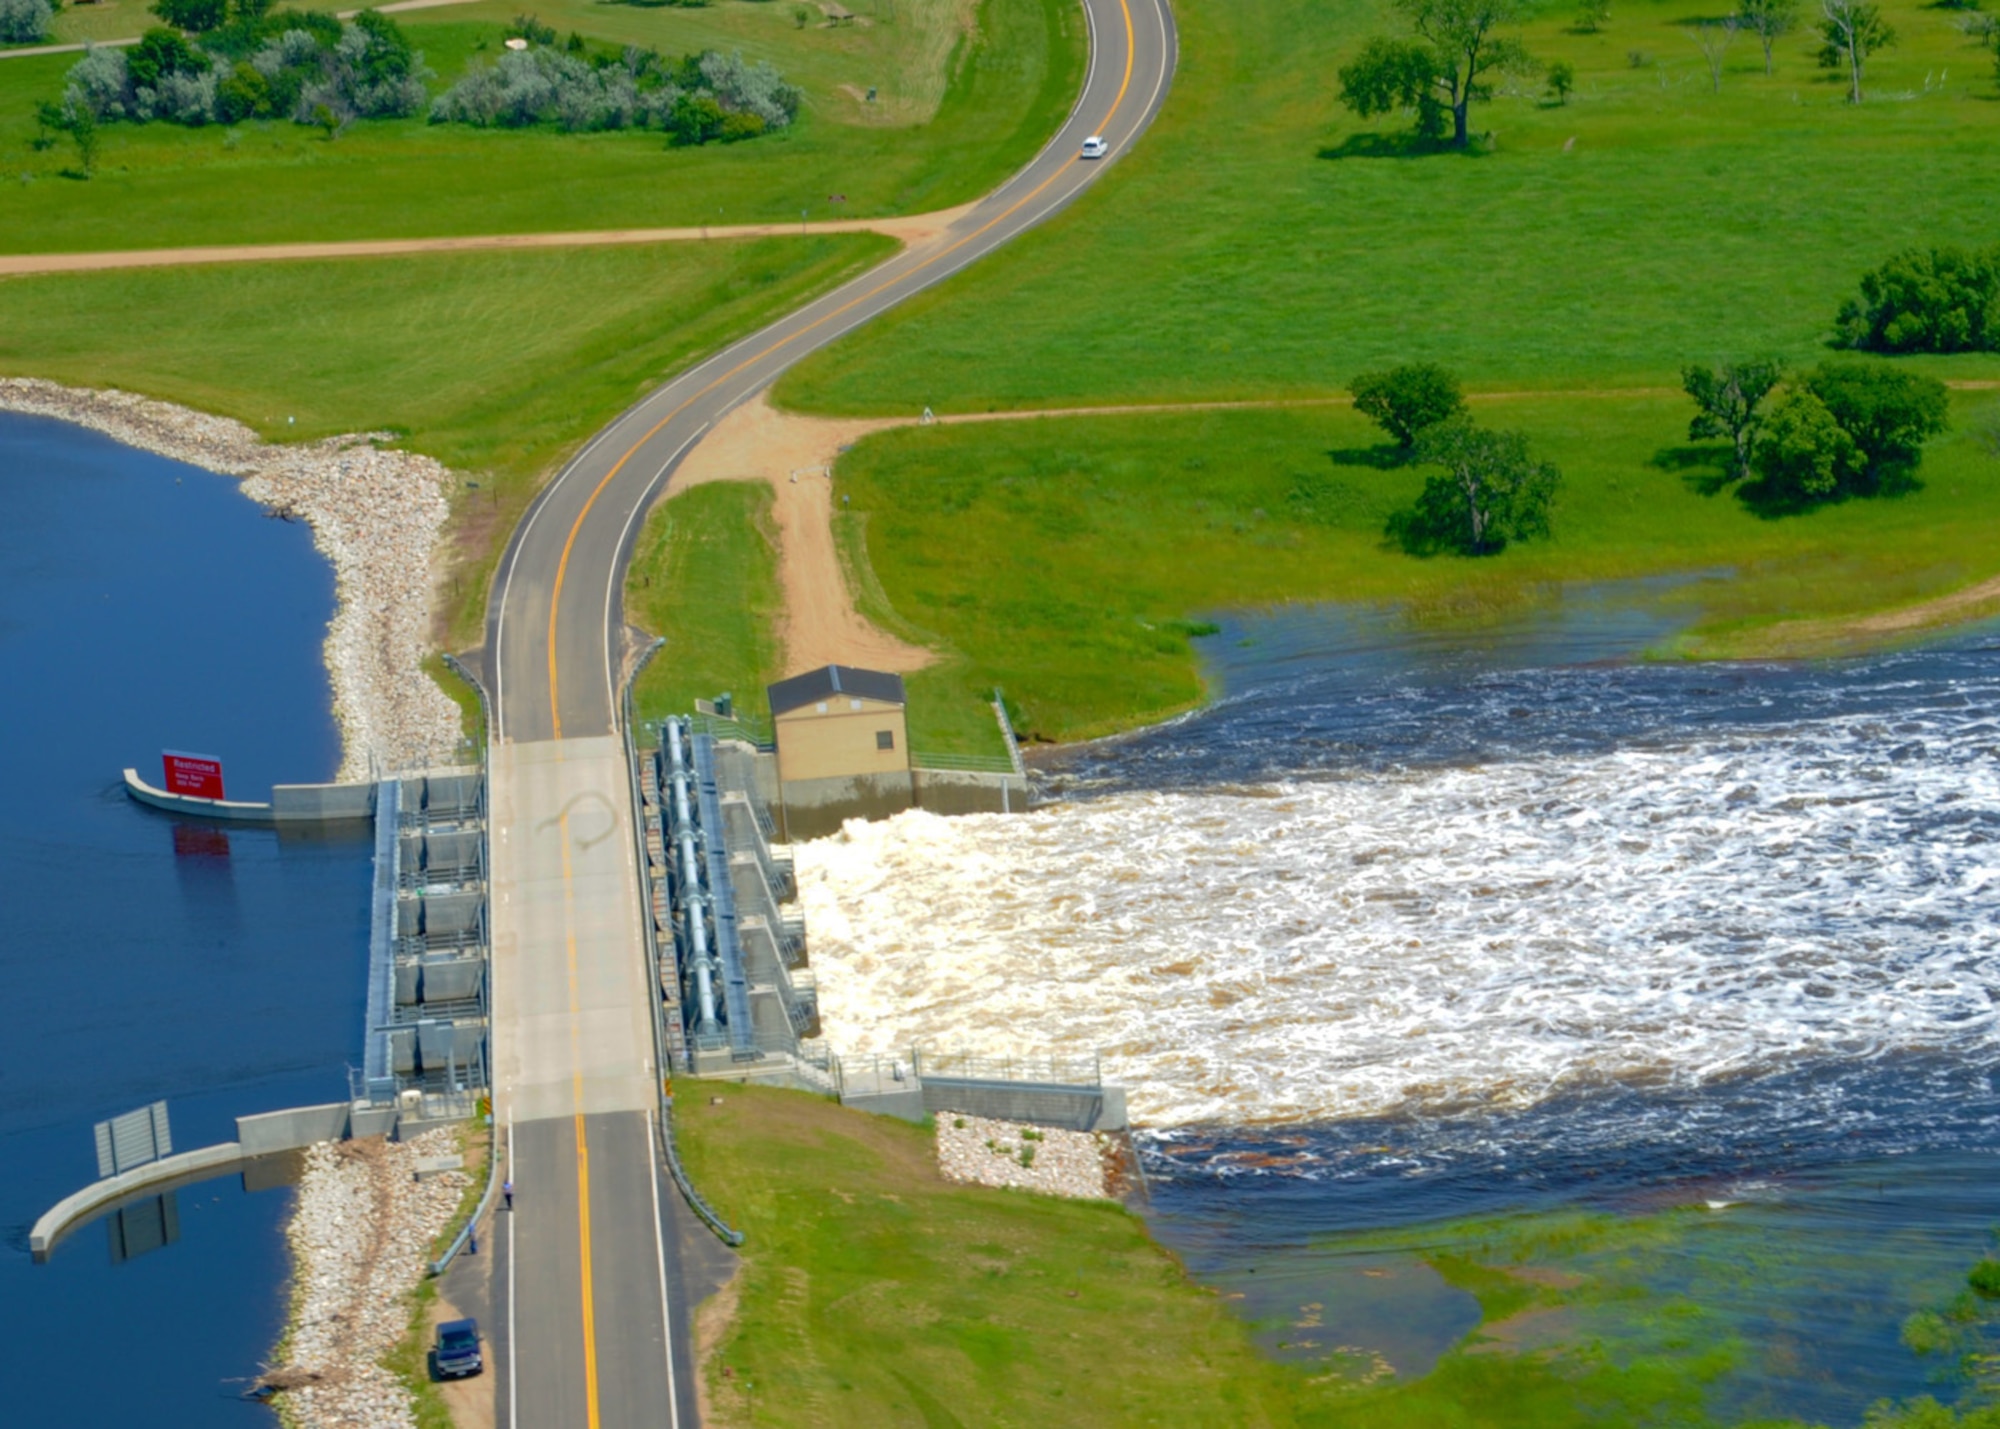 MINOT, N.D. -- Water flows through the Lake Darling Dam near Minot, N.D. June 23, 2011. The U.S. Army Corps of Engineers intend to raise the water release from Lake Darling to 28,000 cubic feet per second. (U.S. Air Force photo by Staff Sgt. Sharida Jackson) (RELEASED)